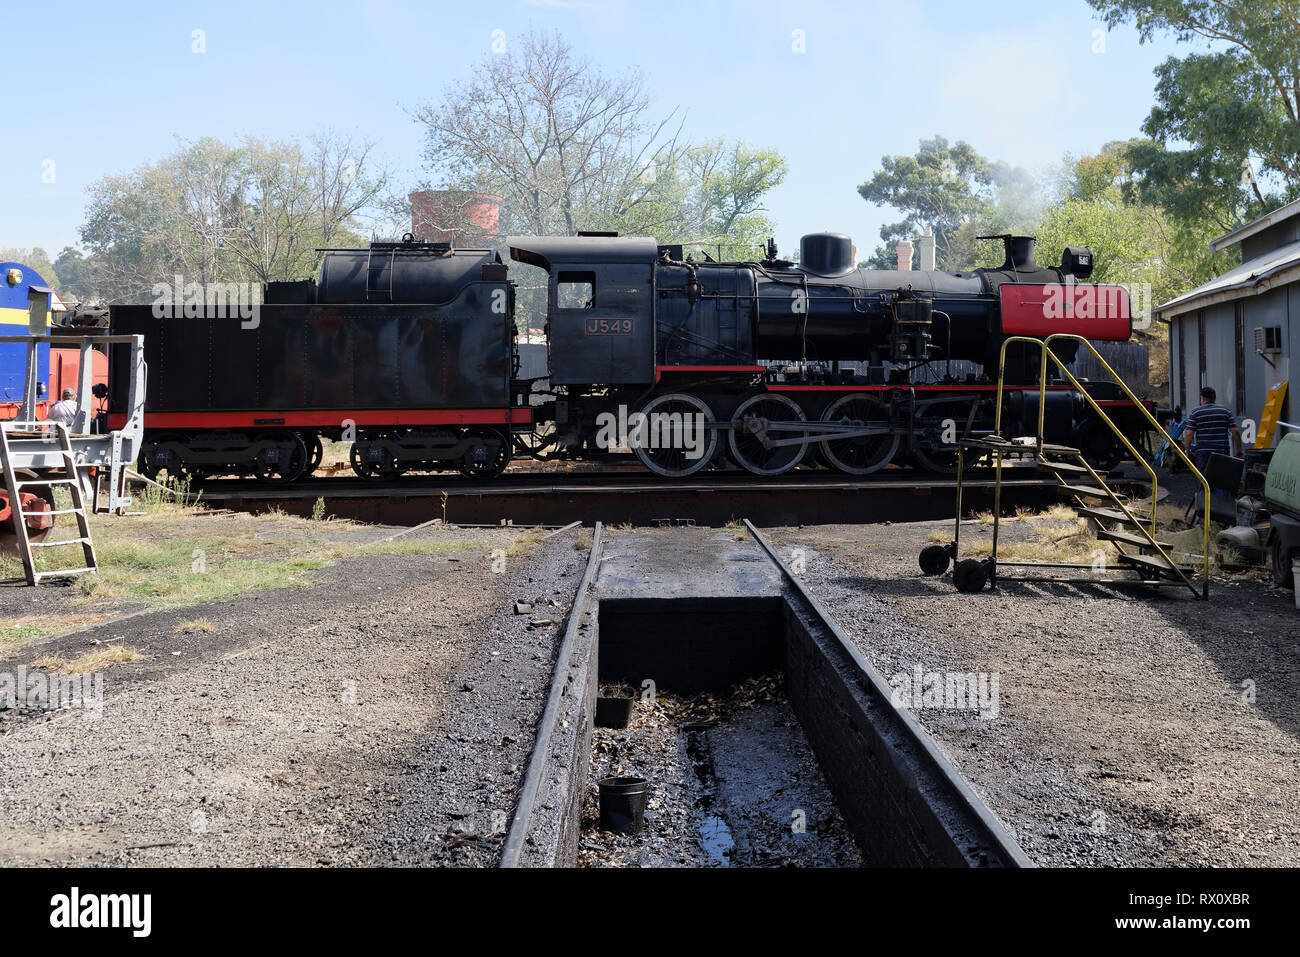 The J549 oil burning steam locomotive built in 1954 by the British locomotive builder Vulcan Foundry Limited, Maldon railway station, Victoria, Austra Stock Photo